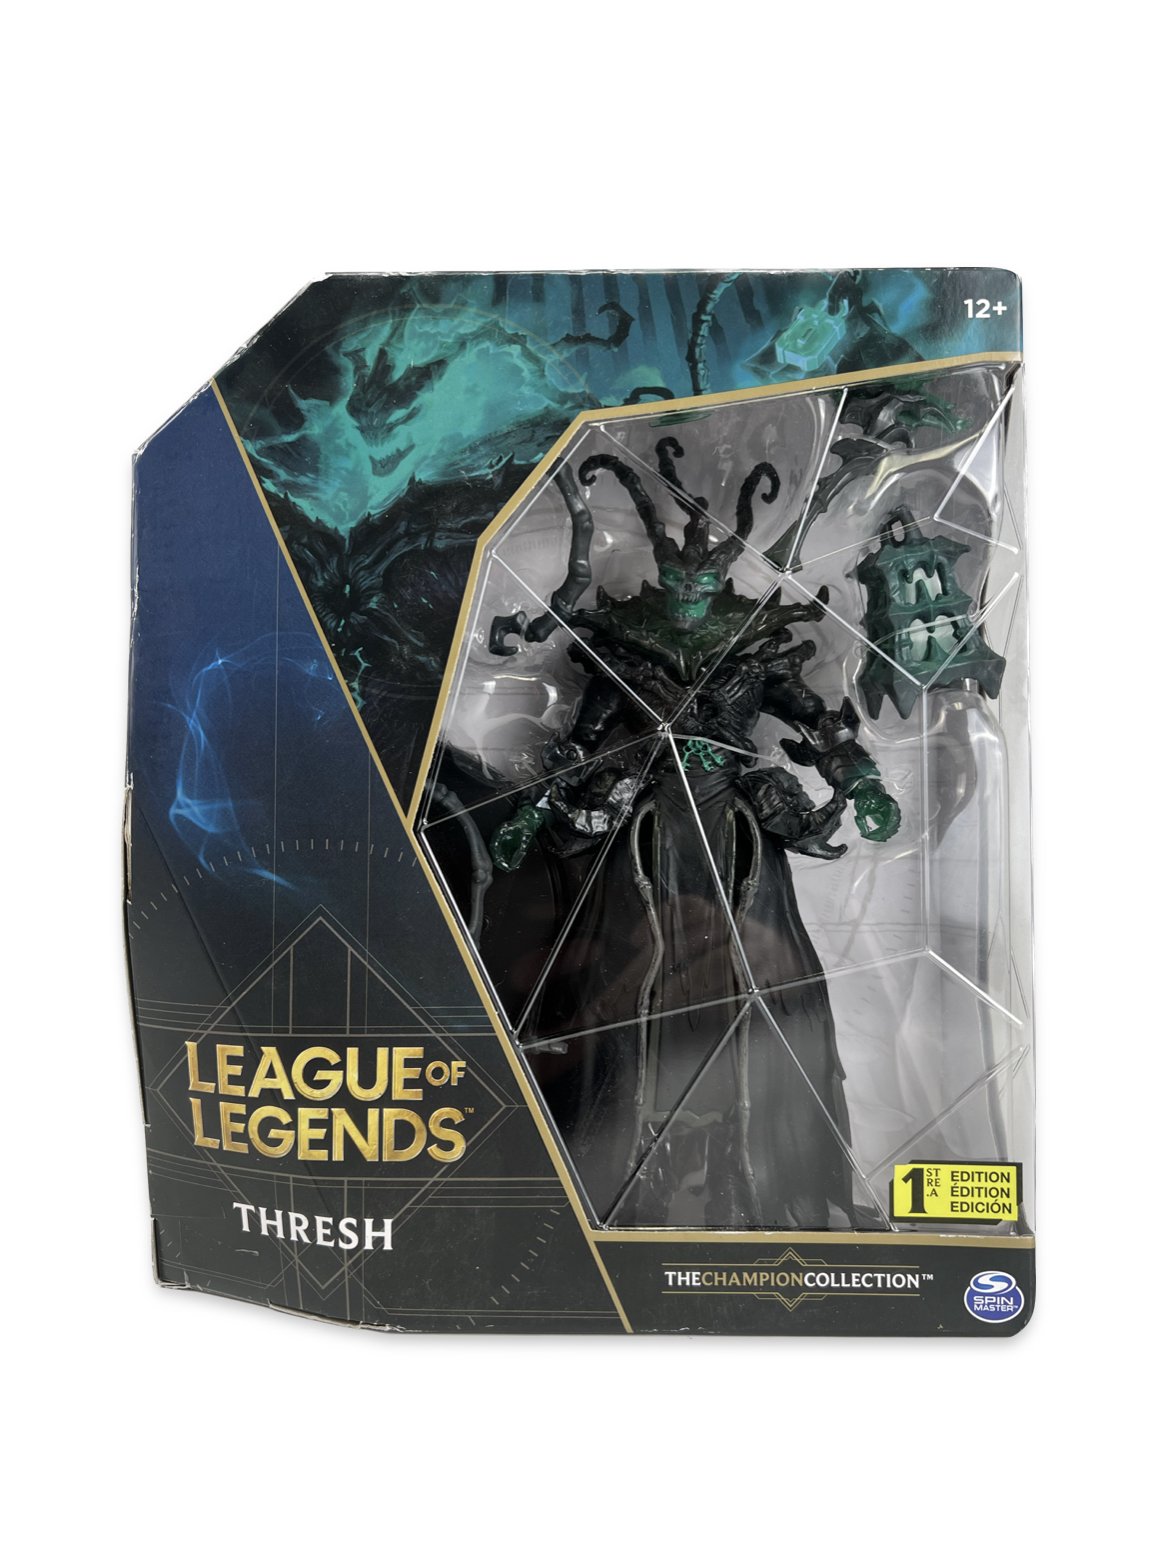 League of Legends - Thresh Figure — Fashion Cents Consignment & Thrift  Stores in Ephrata, Strasburg, East Earl, Morgantown PA